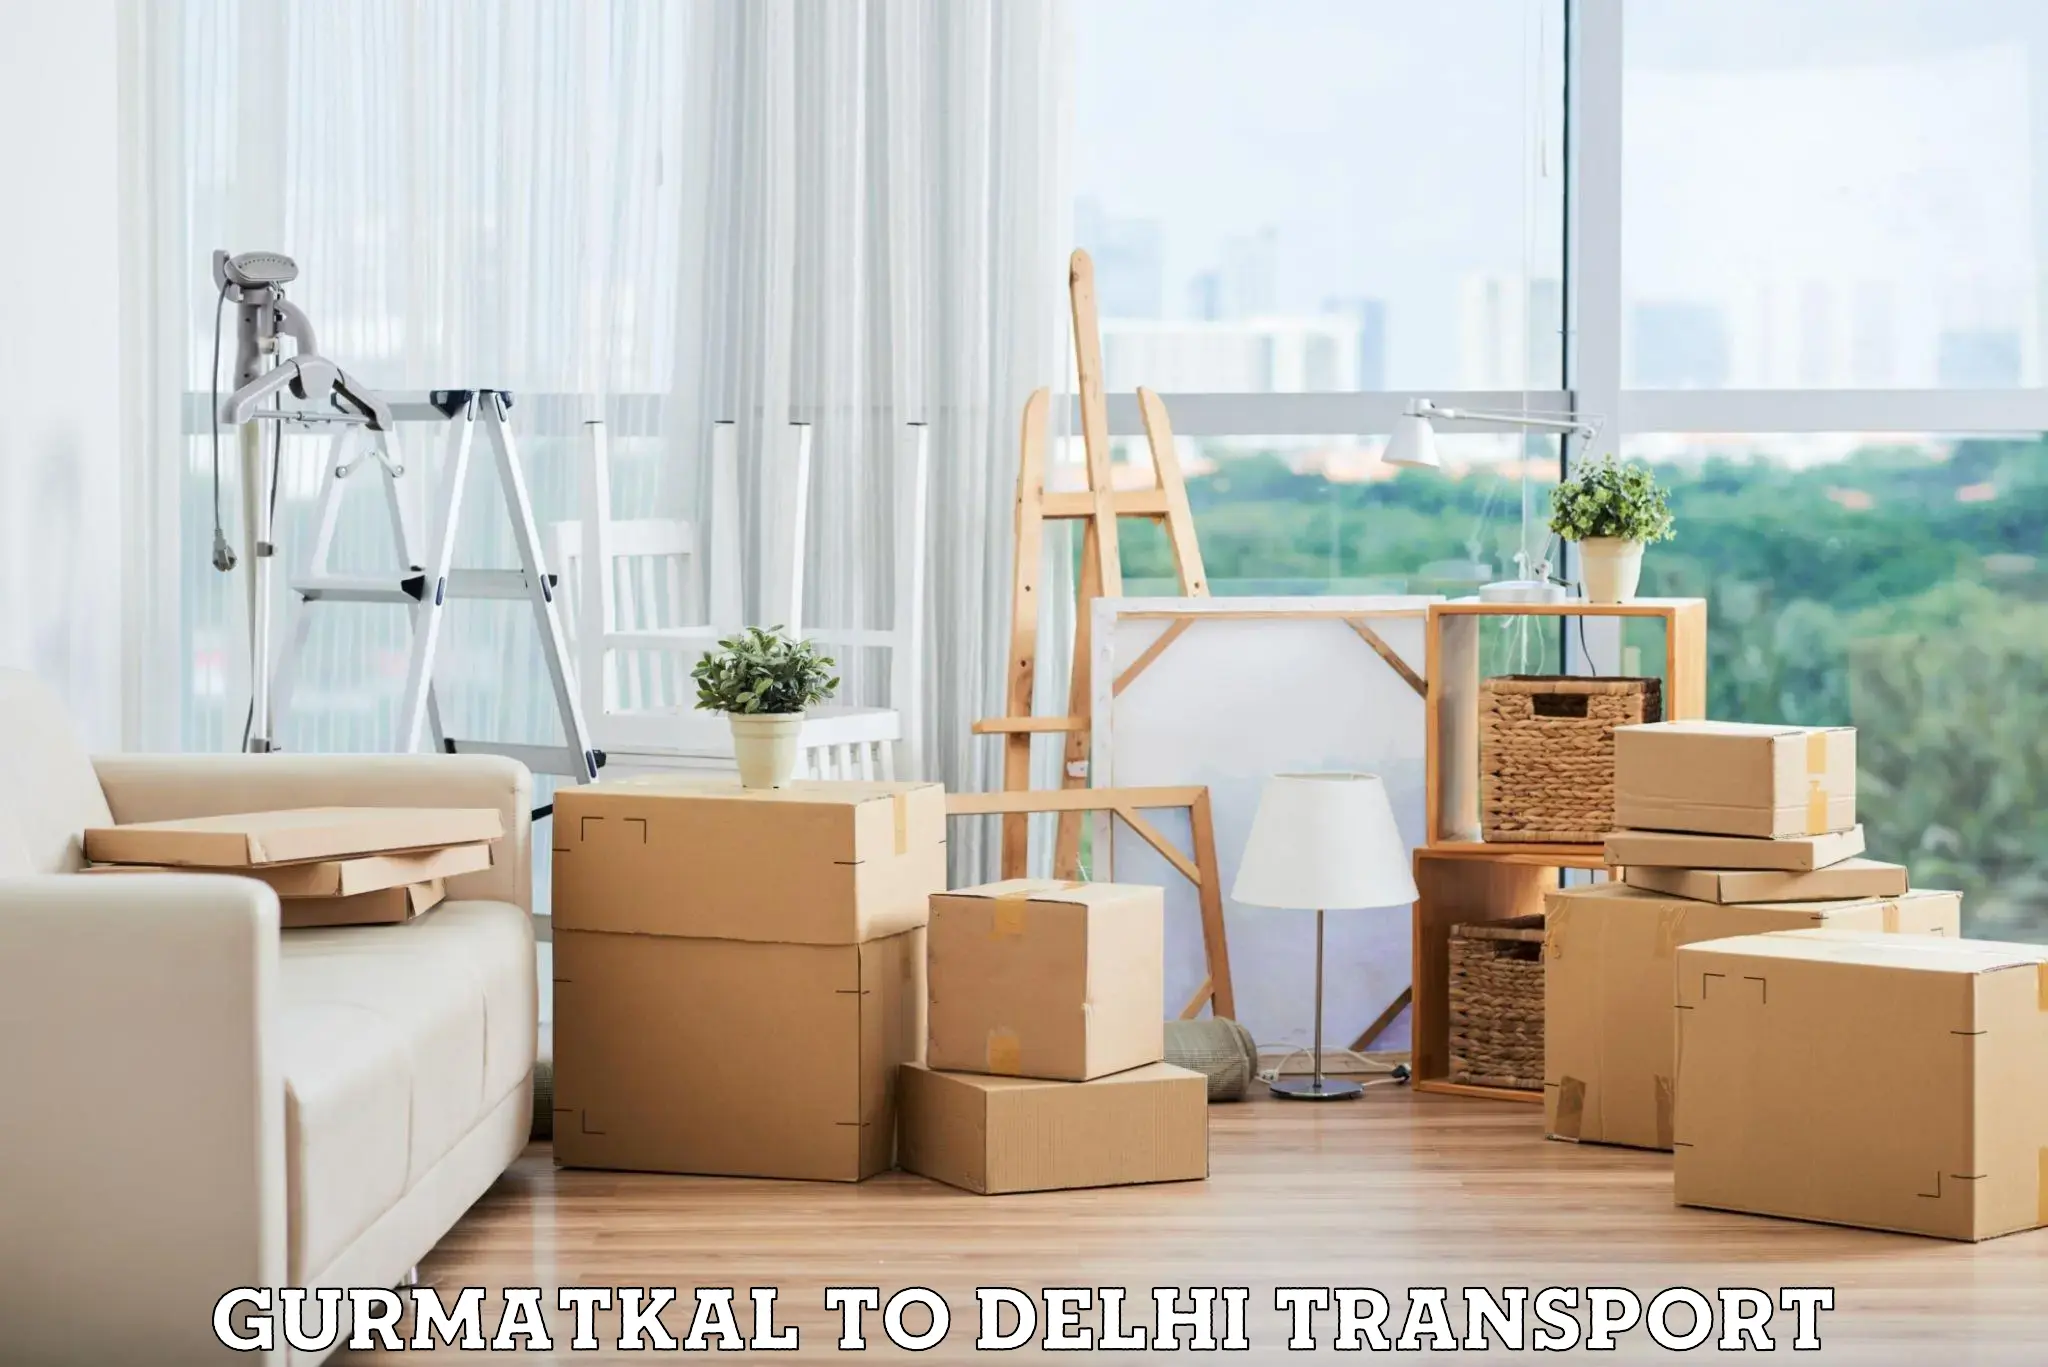 Nationwide transport services Gurmatkal to NCR